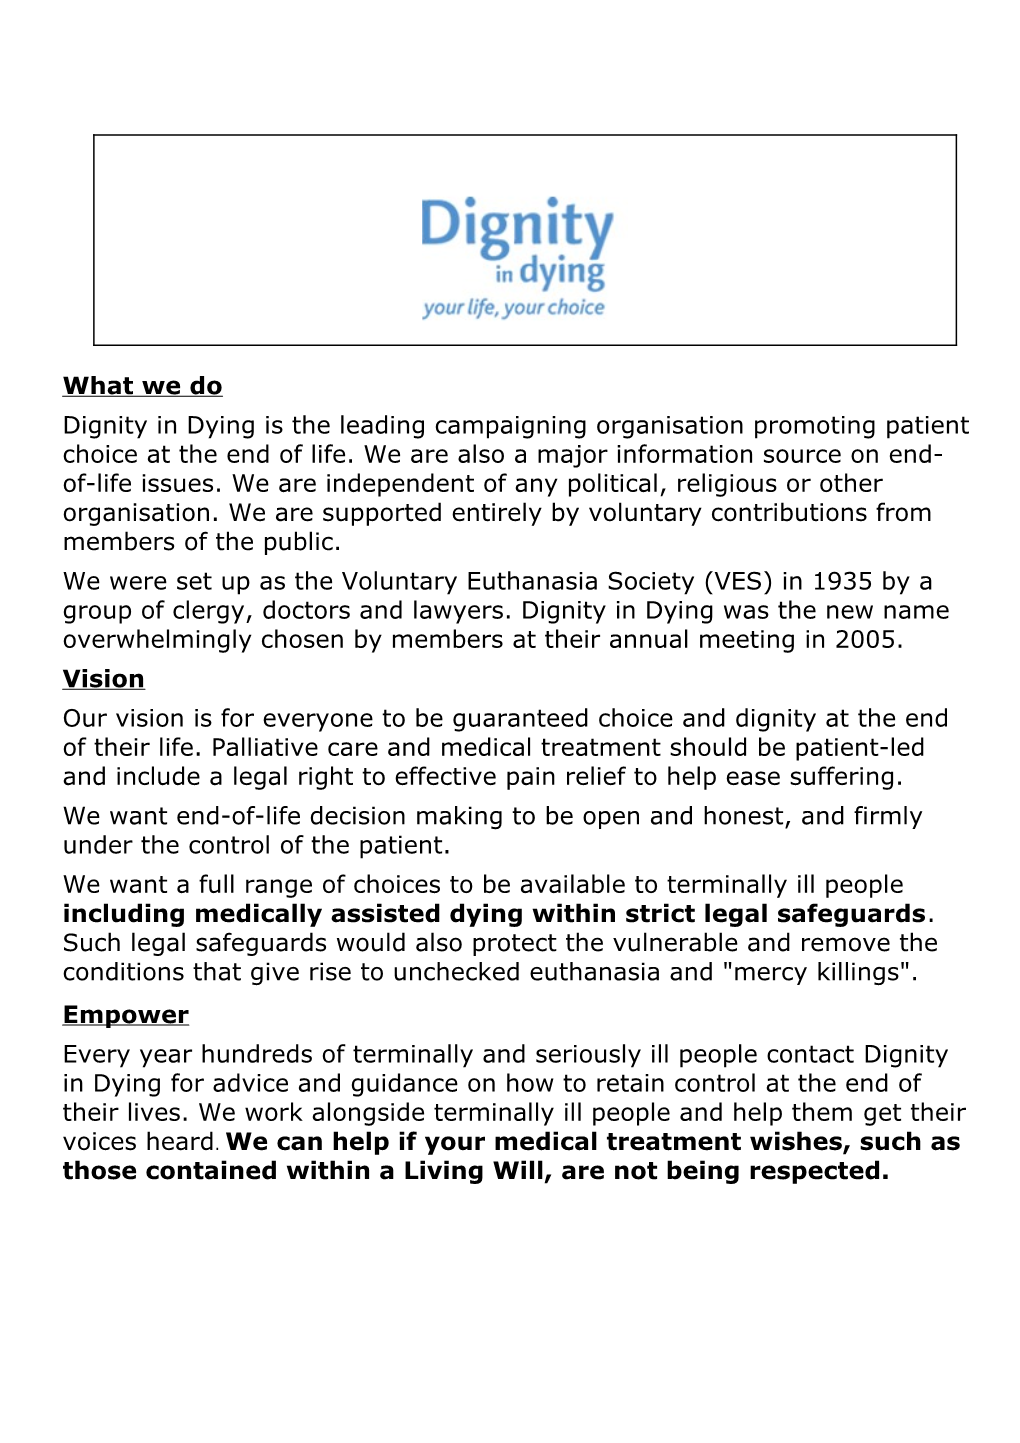 What We Do Dignity in Dying Is the Leading Campaigning Organisation Promoting Patient